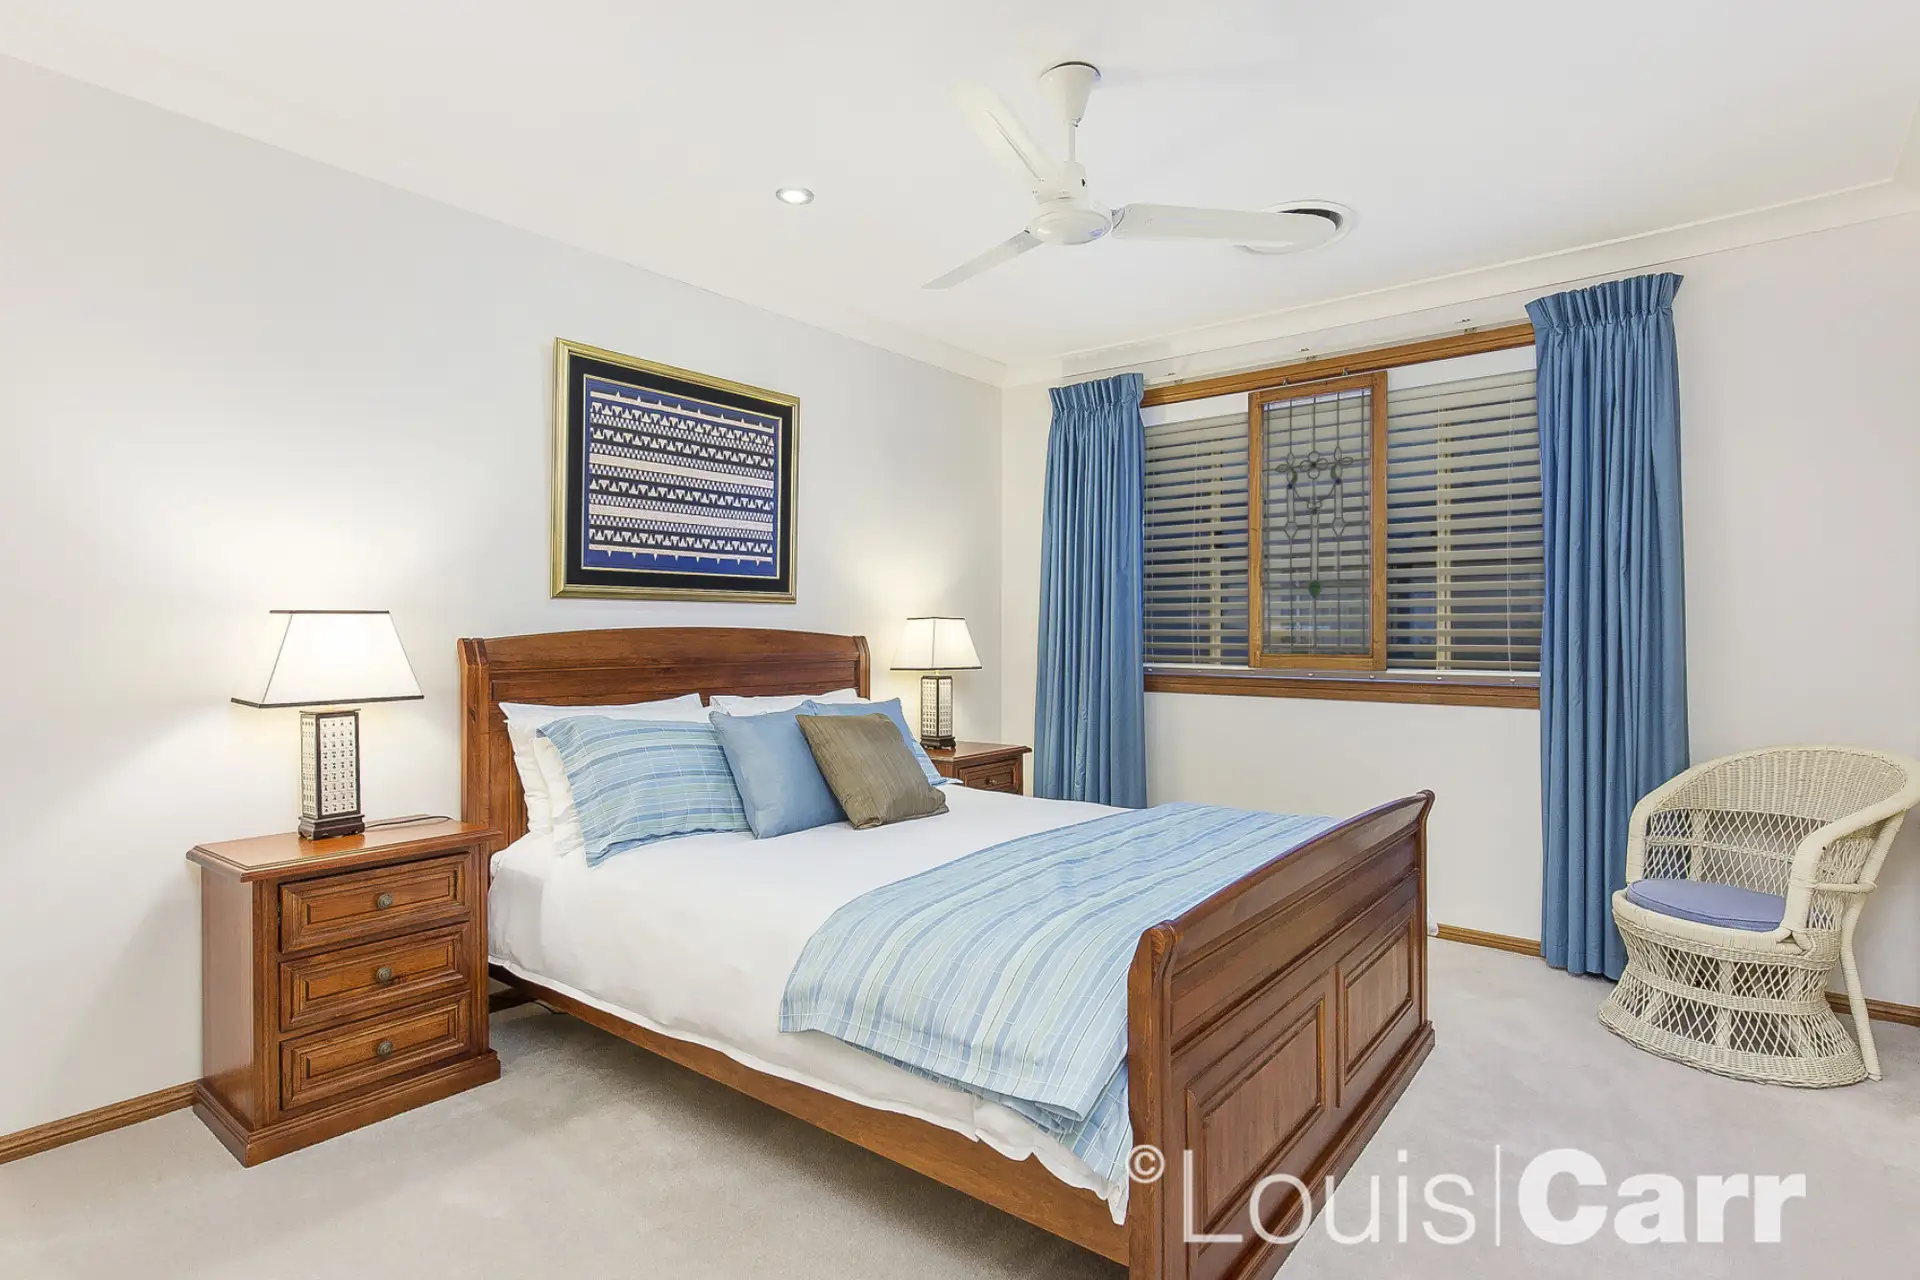 Photo #8: 5 Redwood Close, Castle Hill - Sold by Louis Carr Real Estate